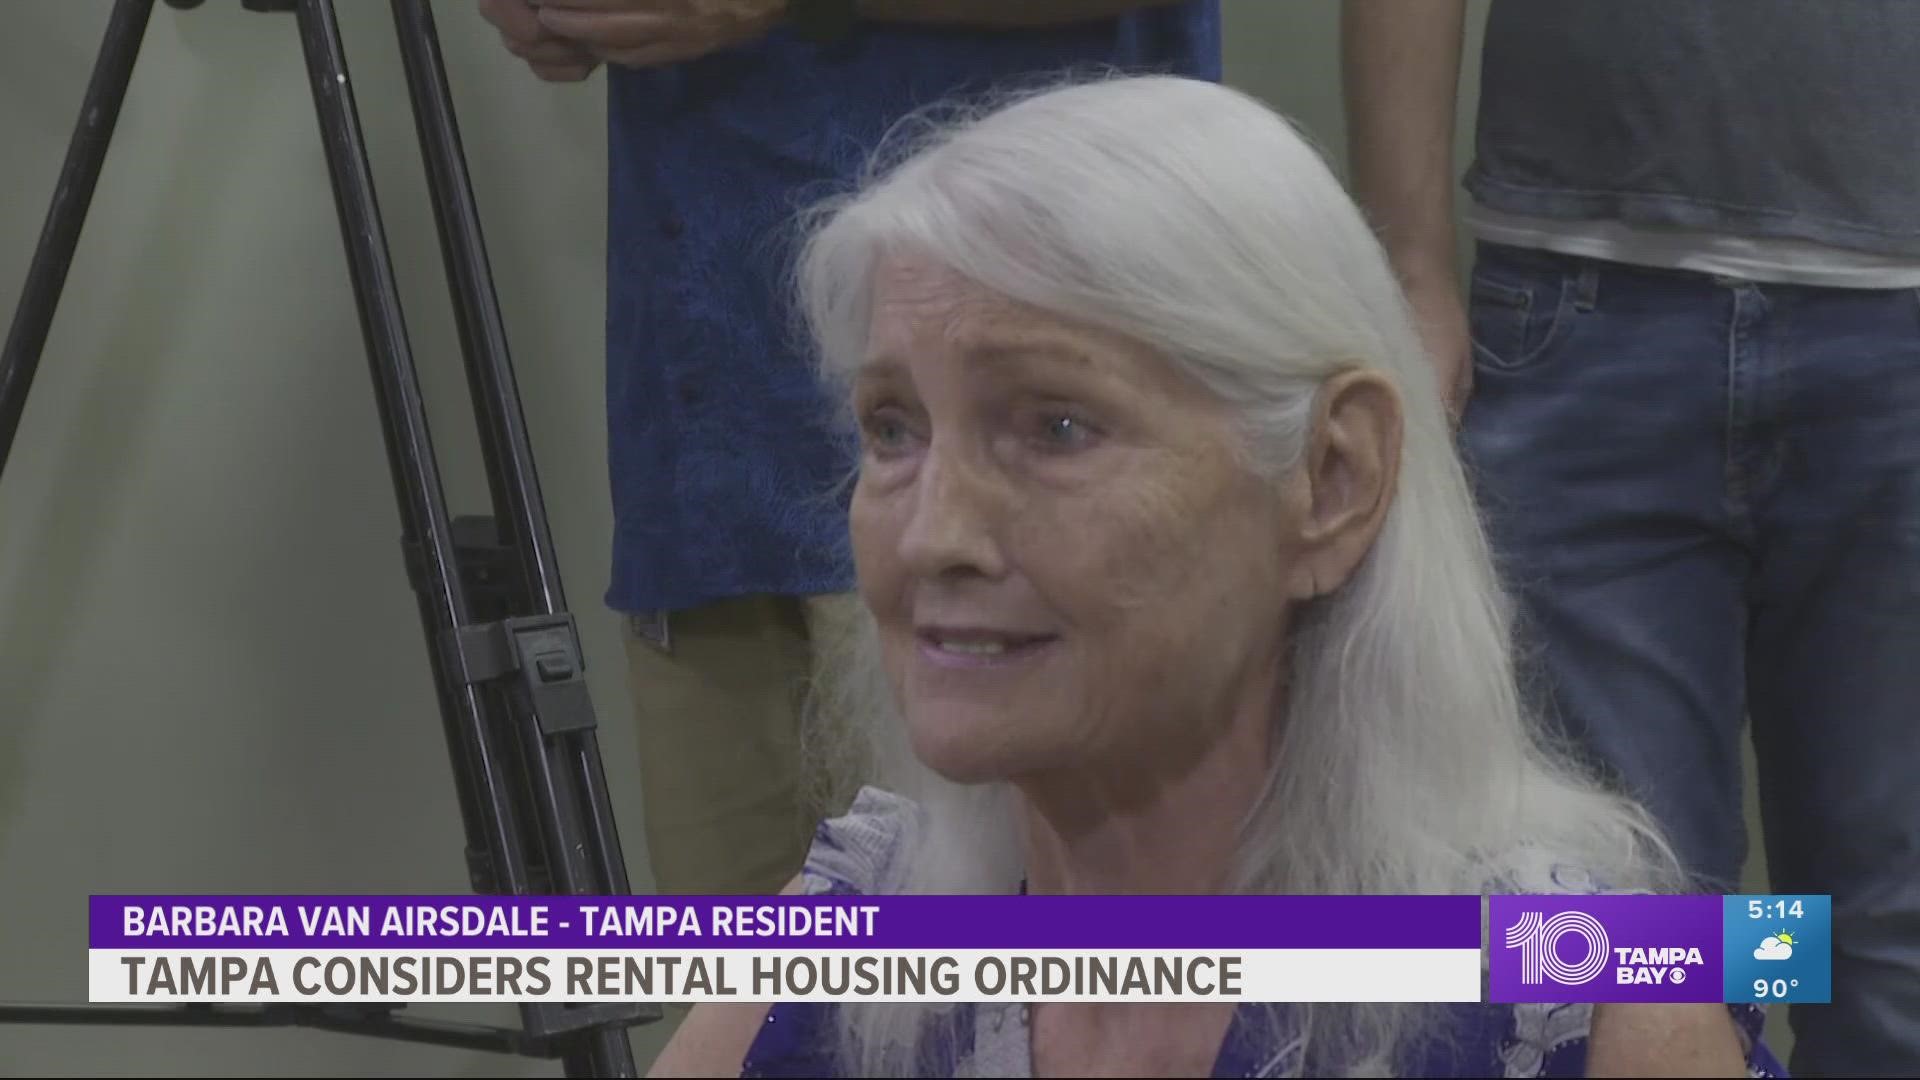 Councilors are looking for ideas that can be implemented immediately to help those struggling to find affordable housing.